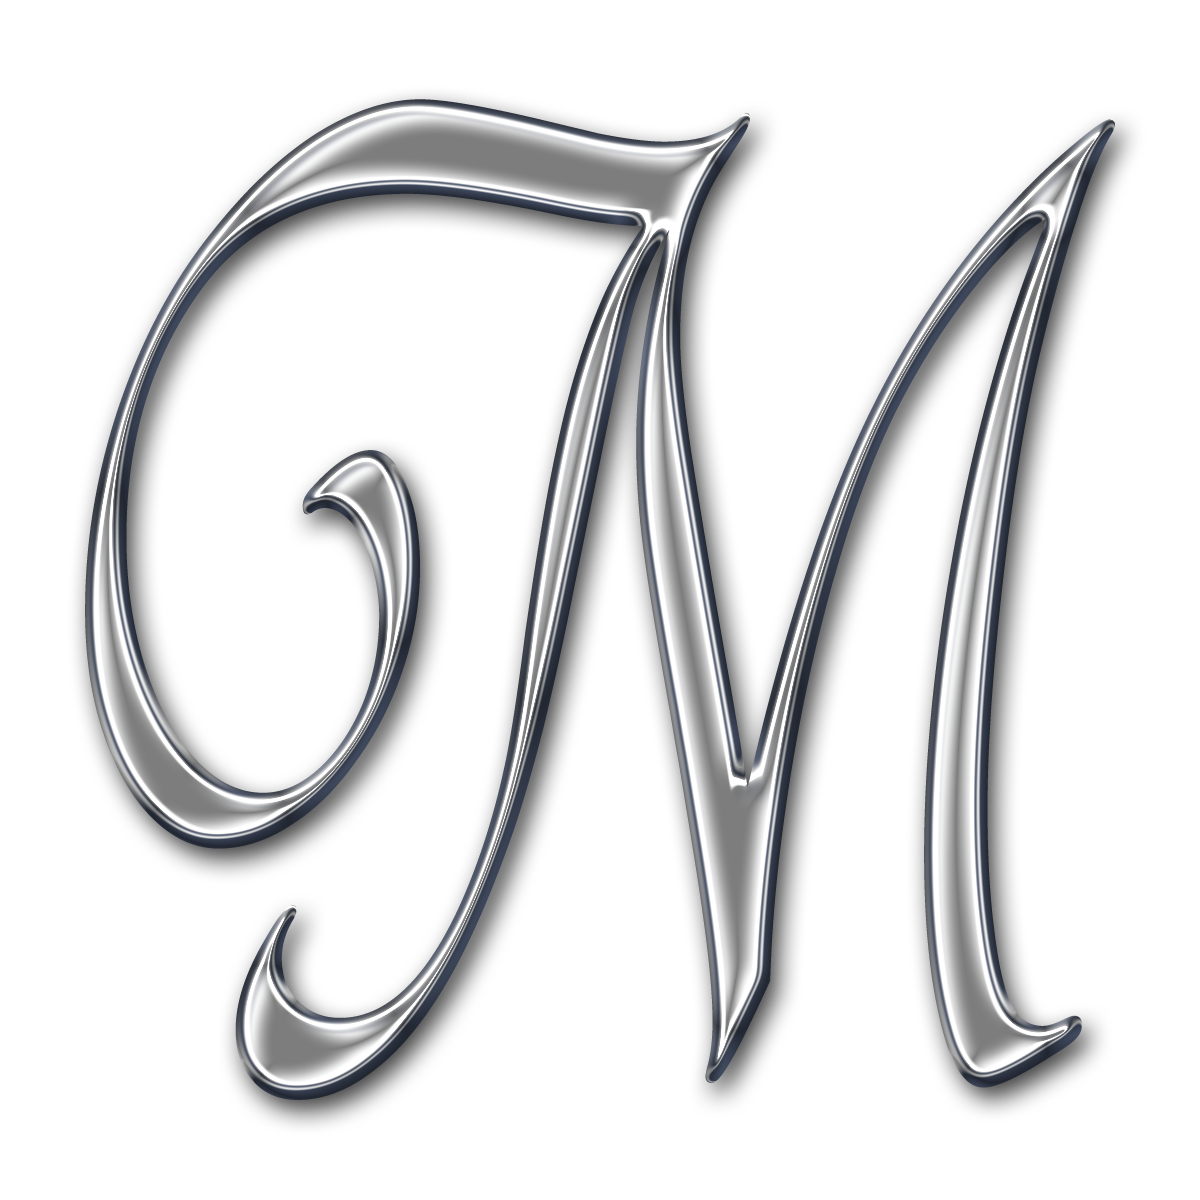 Free Letter M Download Free Clip Art Free Clip Art On Clipart Library